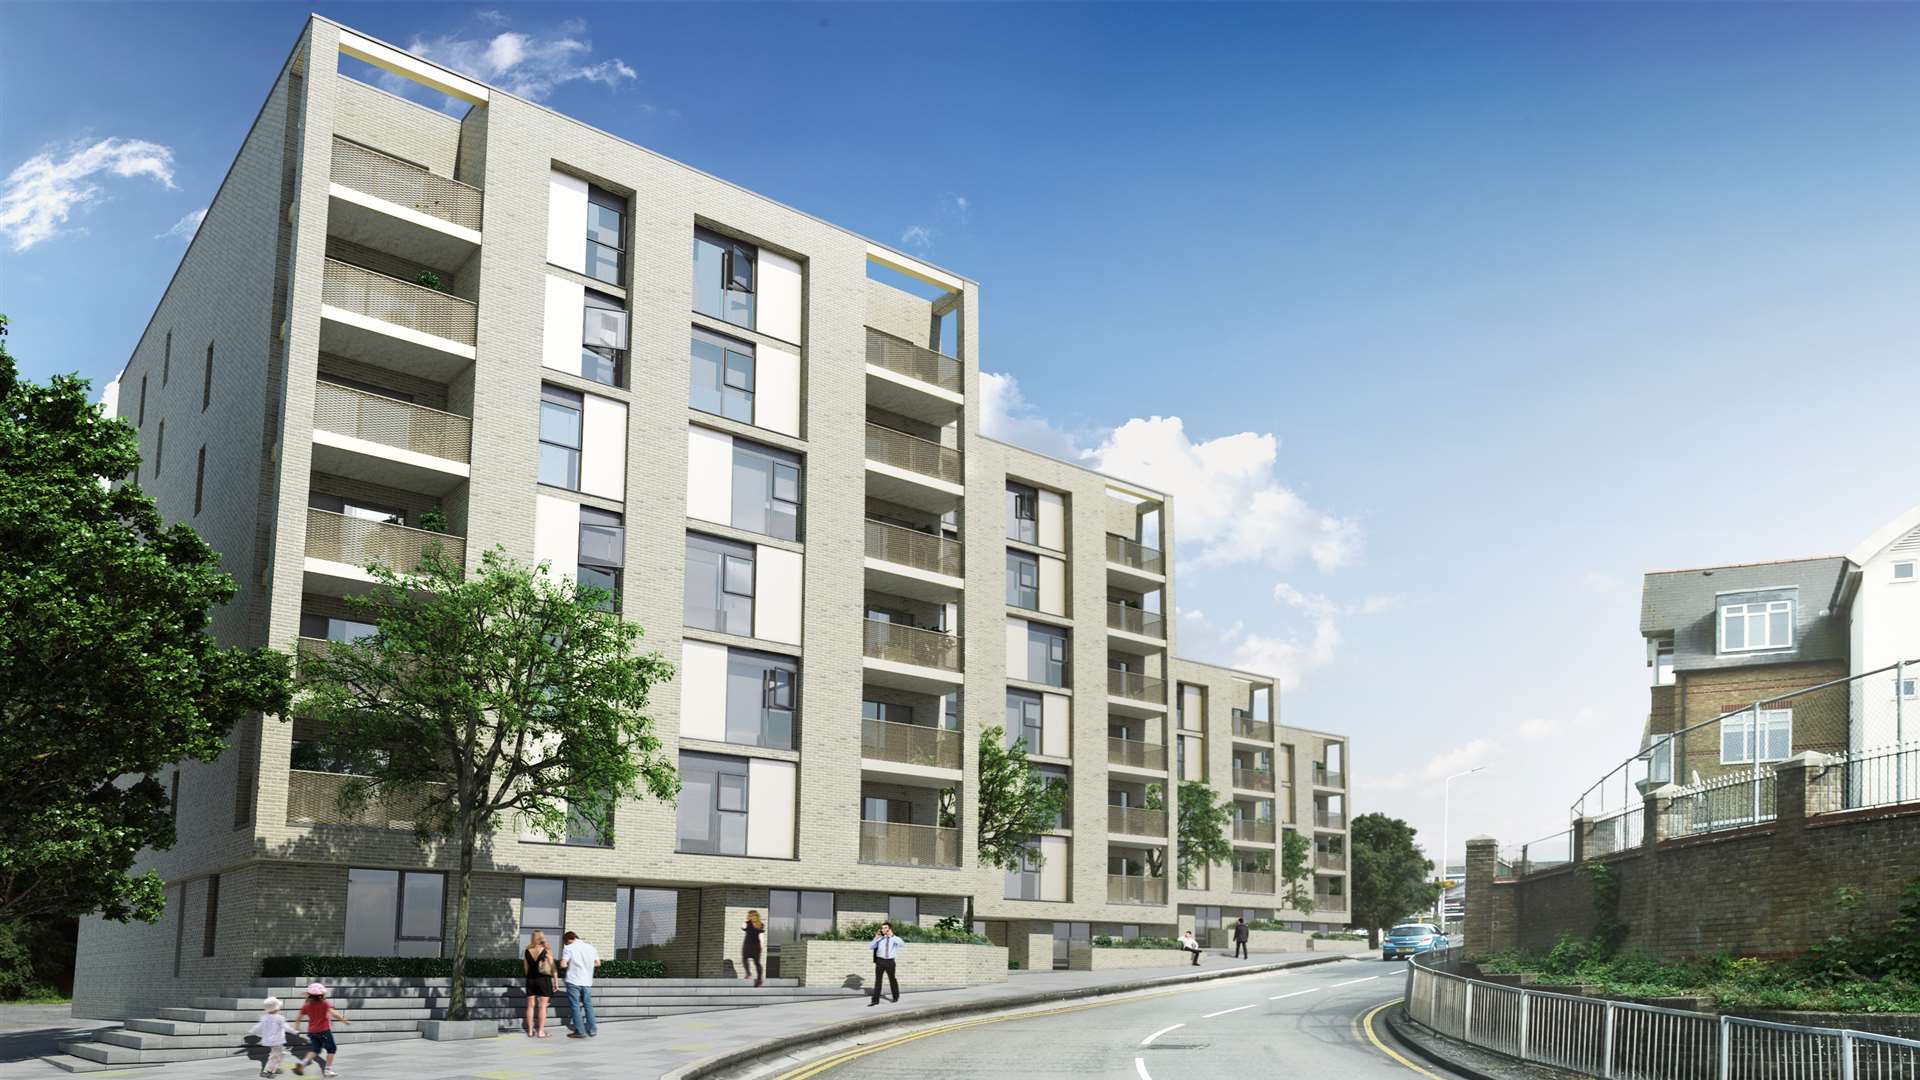 New homes will be built on Spring Street car park